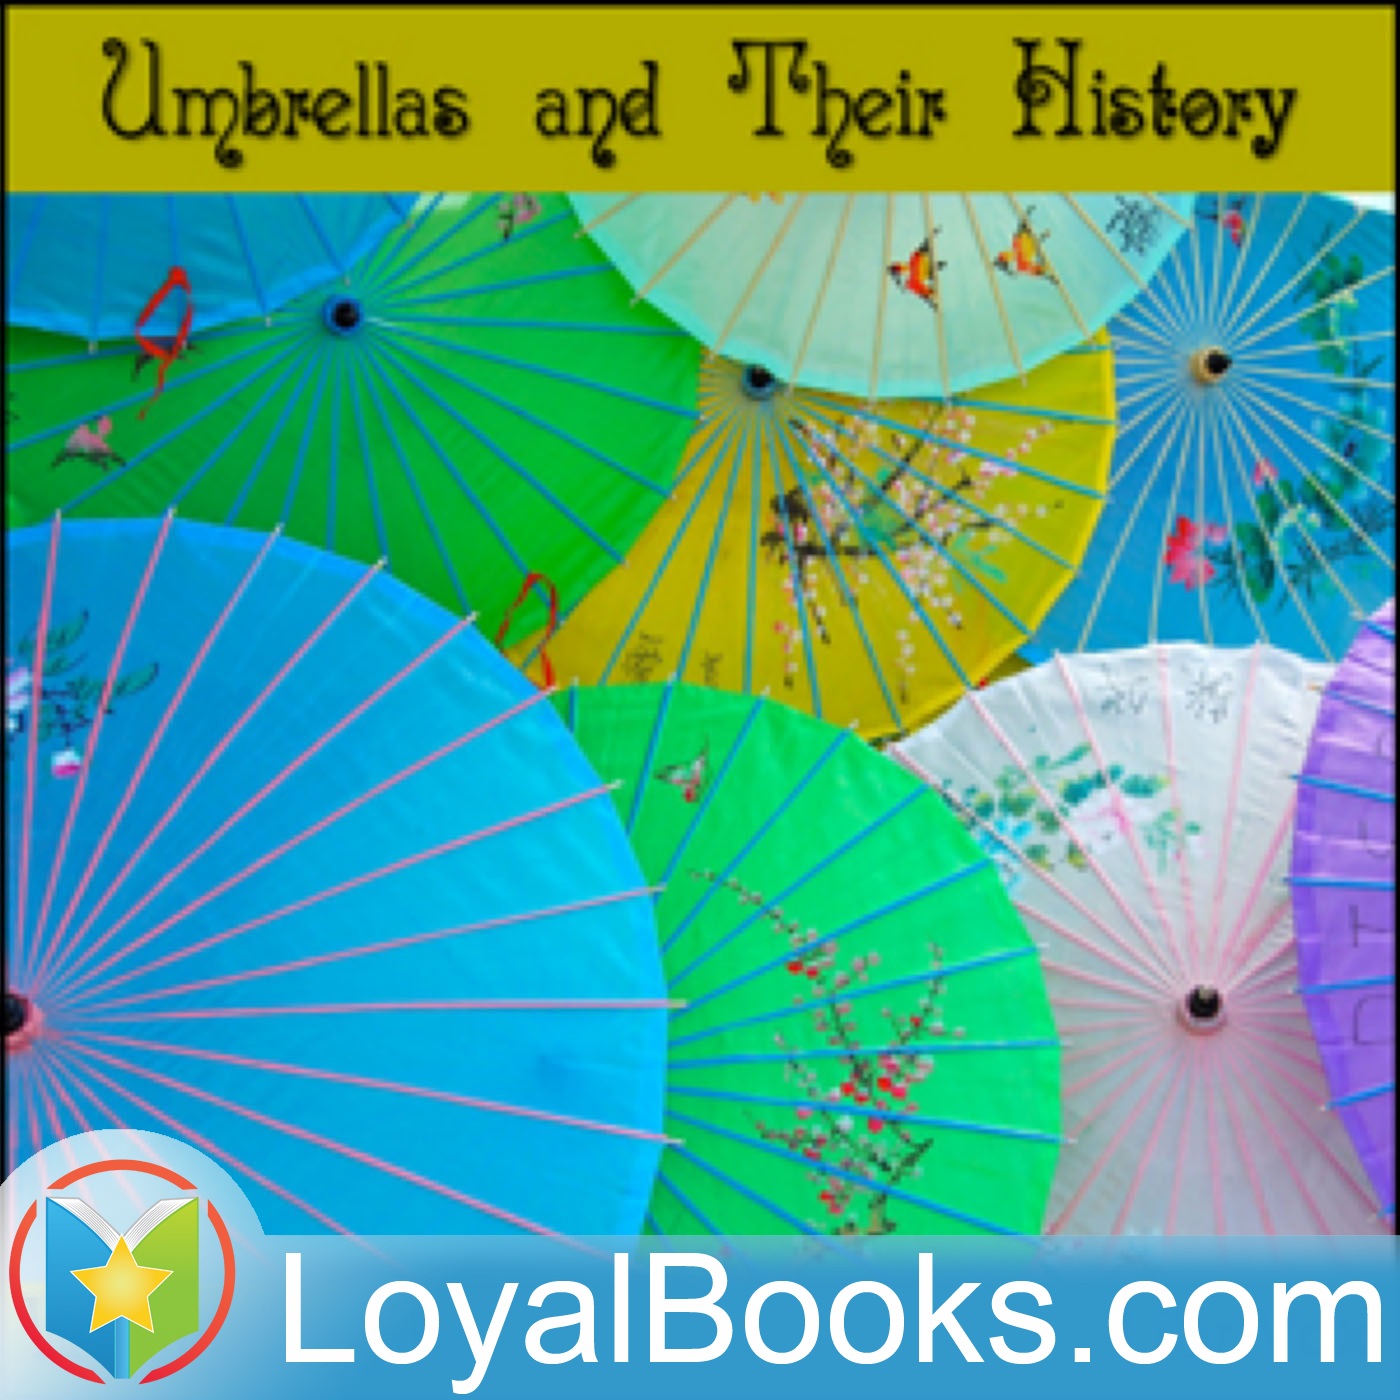 02 – The Ancient History of the Umbrella